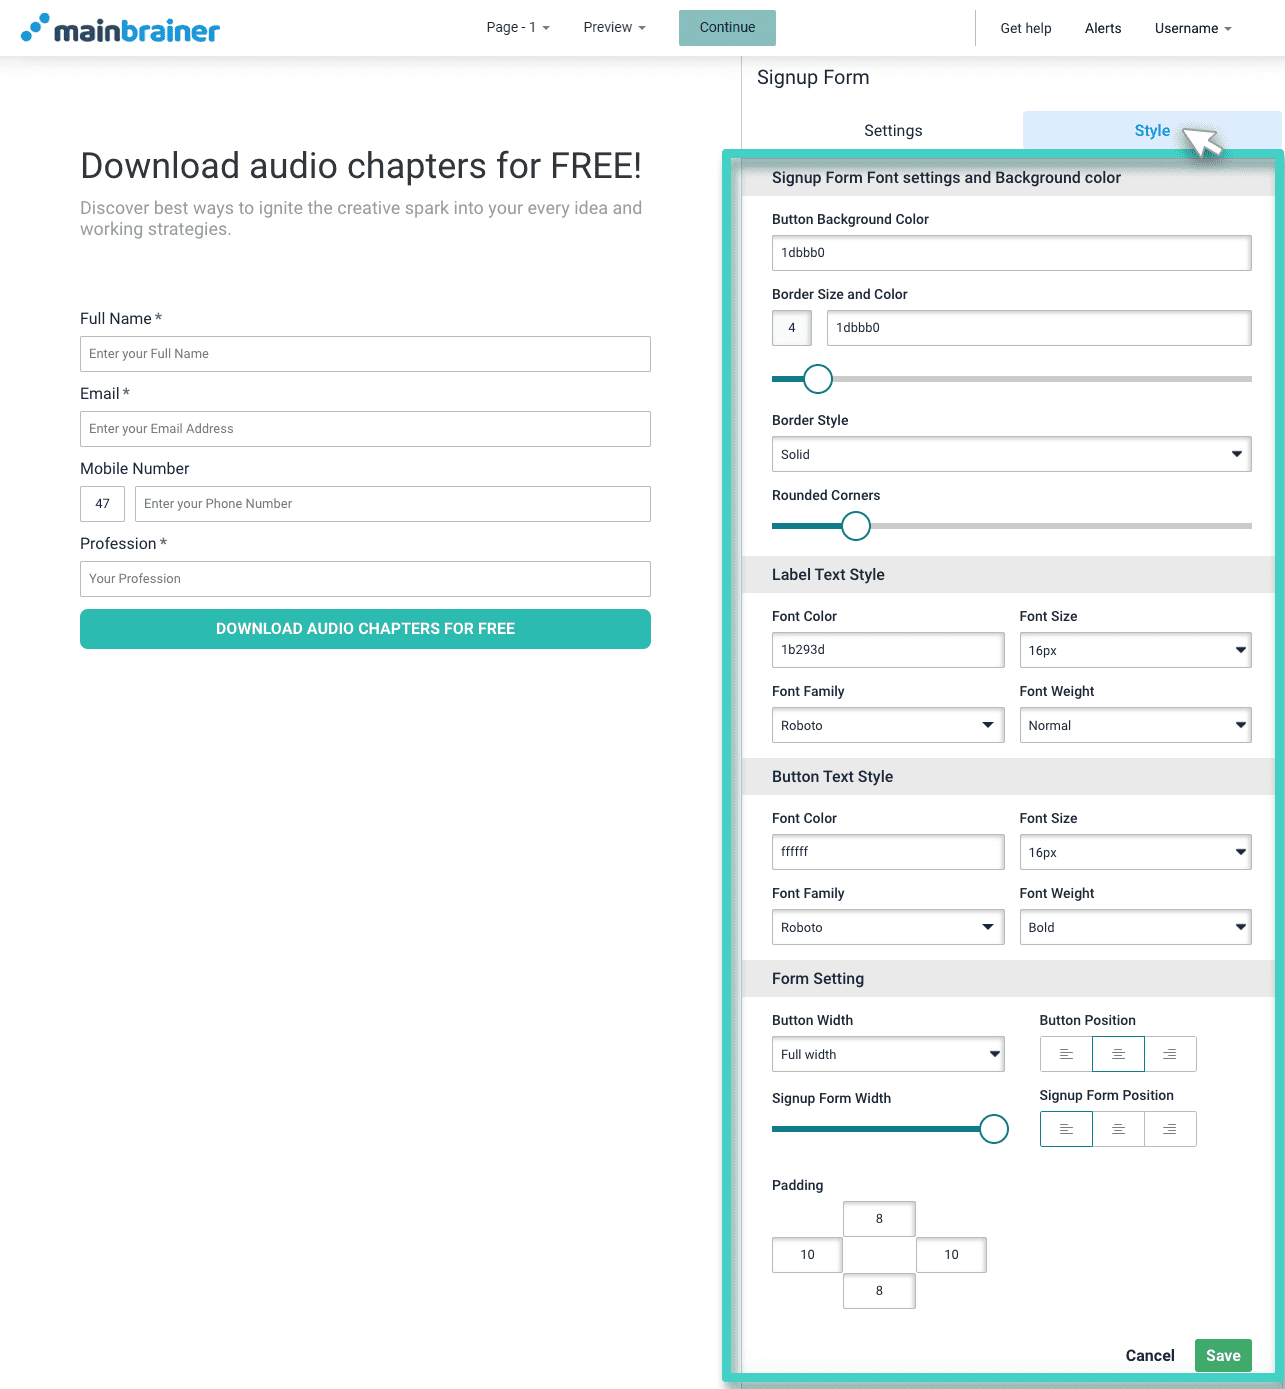 Survey signup form. The signup form widget style tab is highlighted